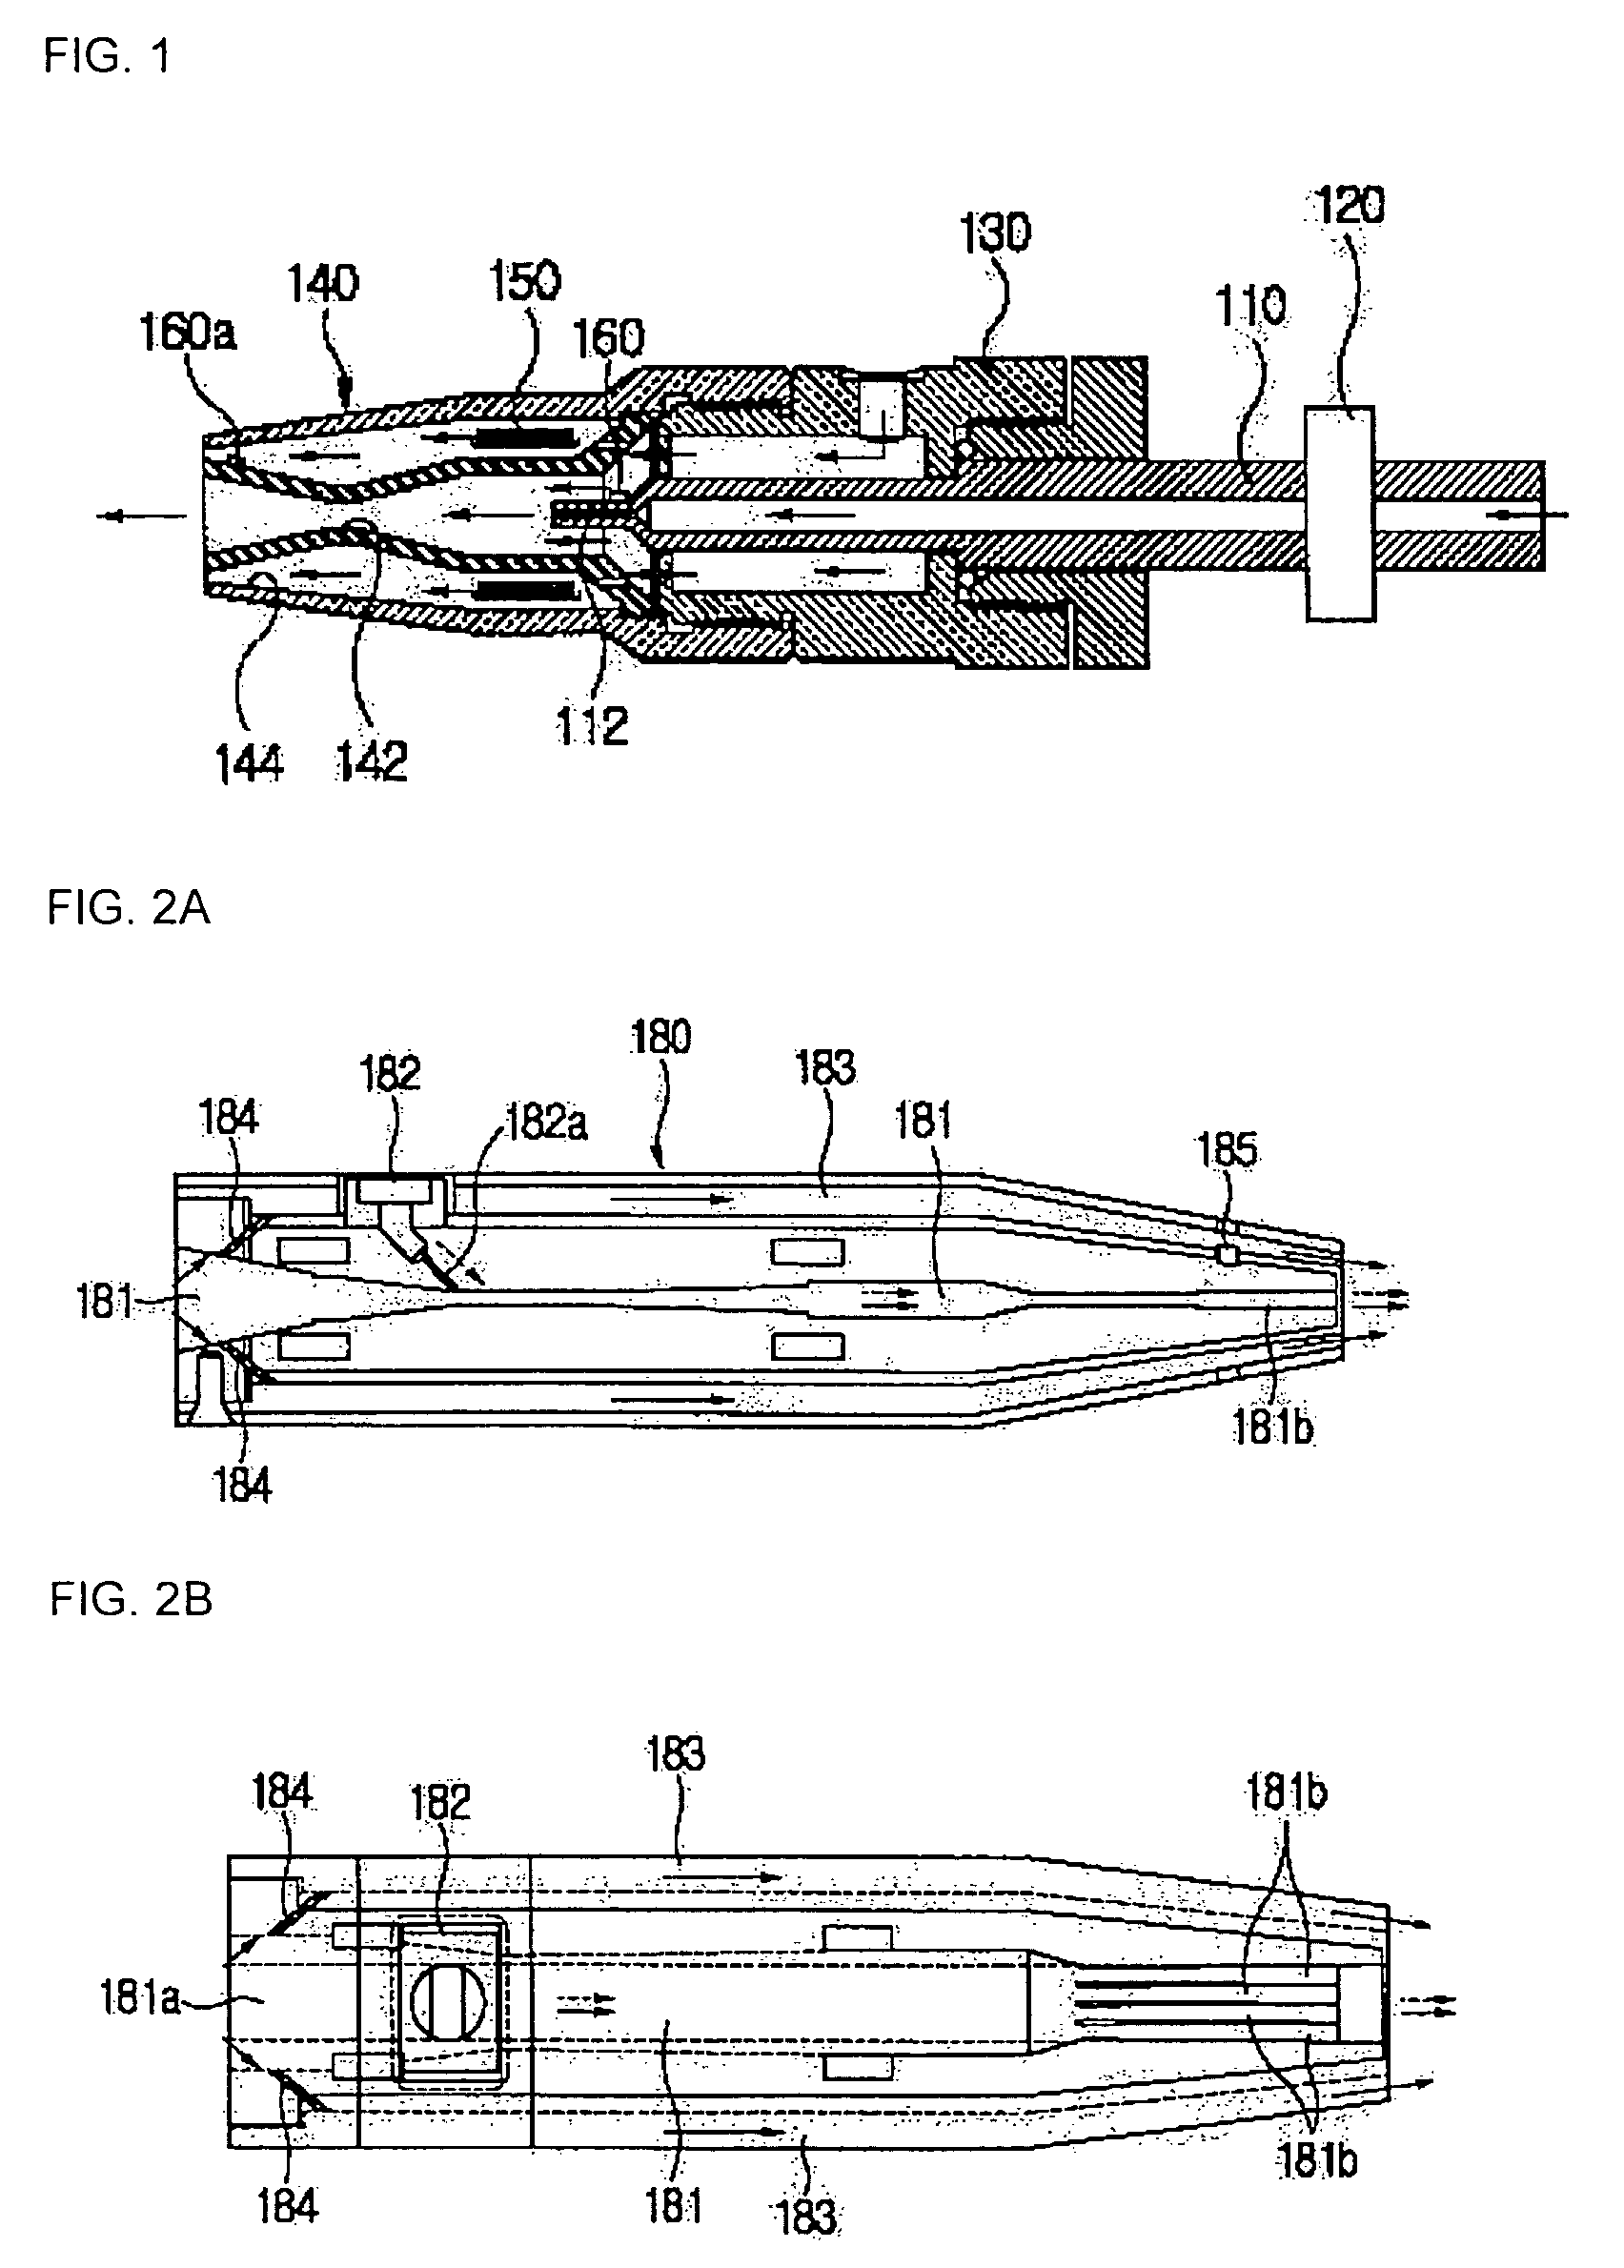 Nozzle for spraying sublimable solid particles entrained in gas for cleaning surface